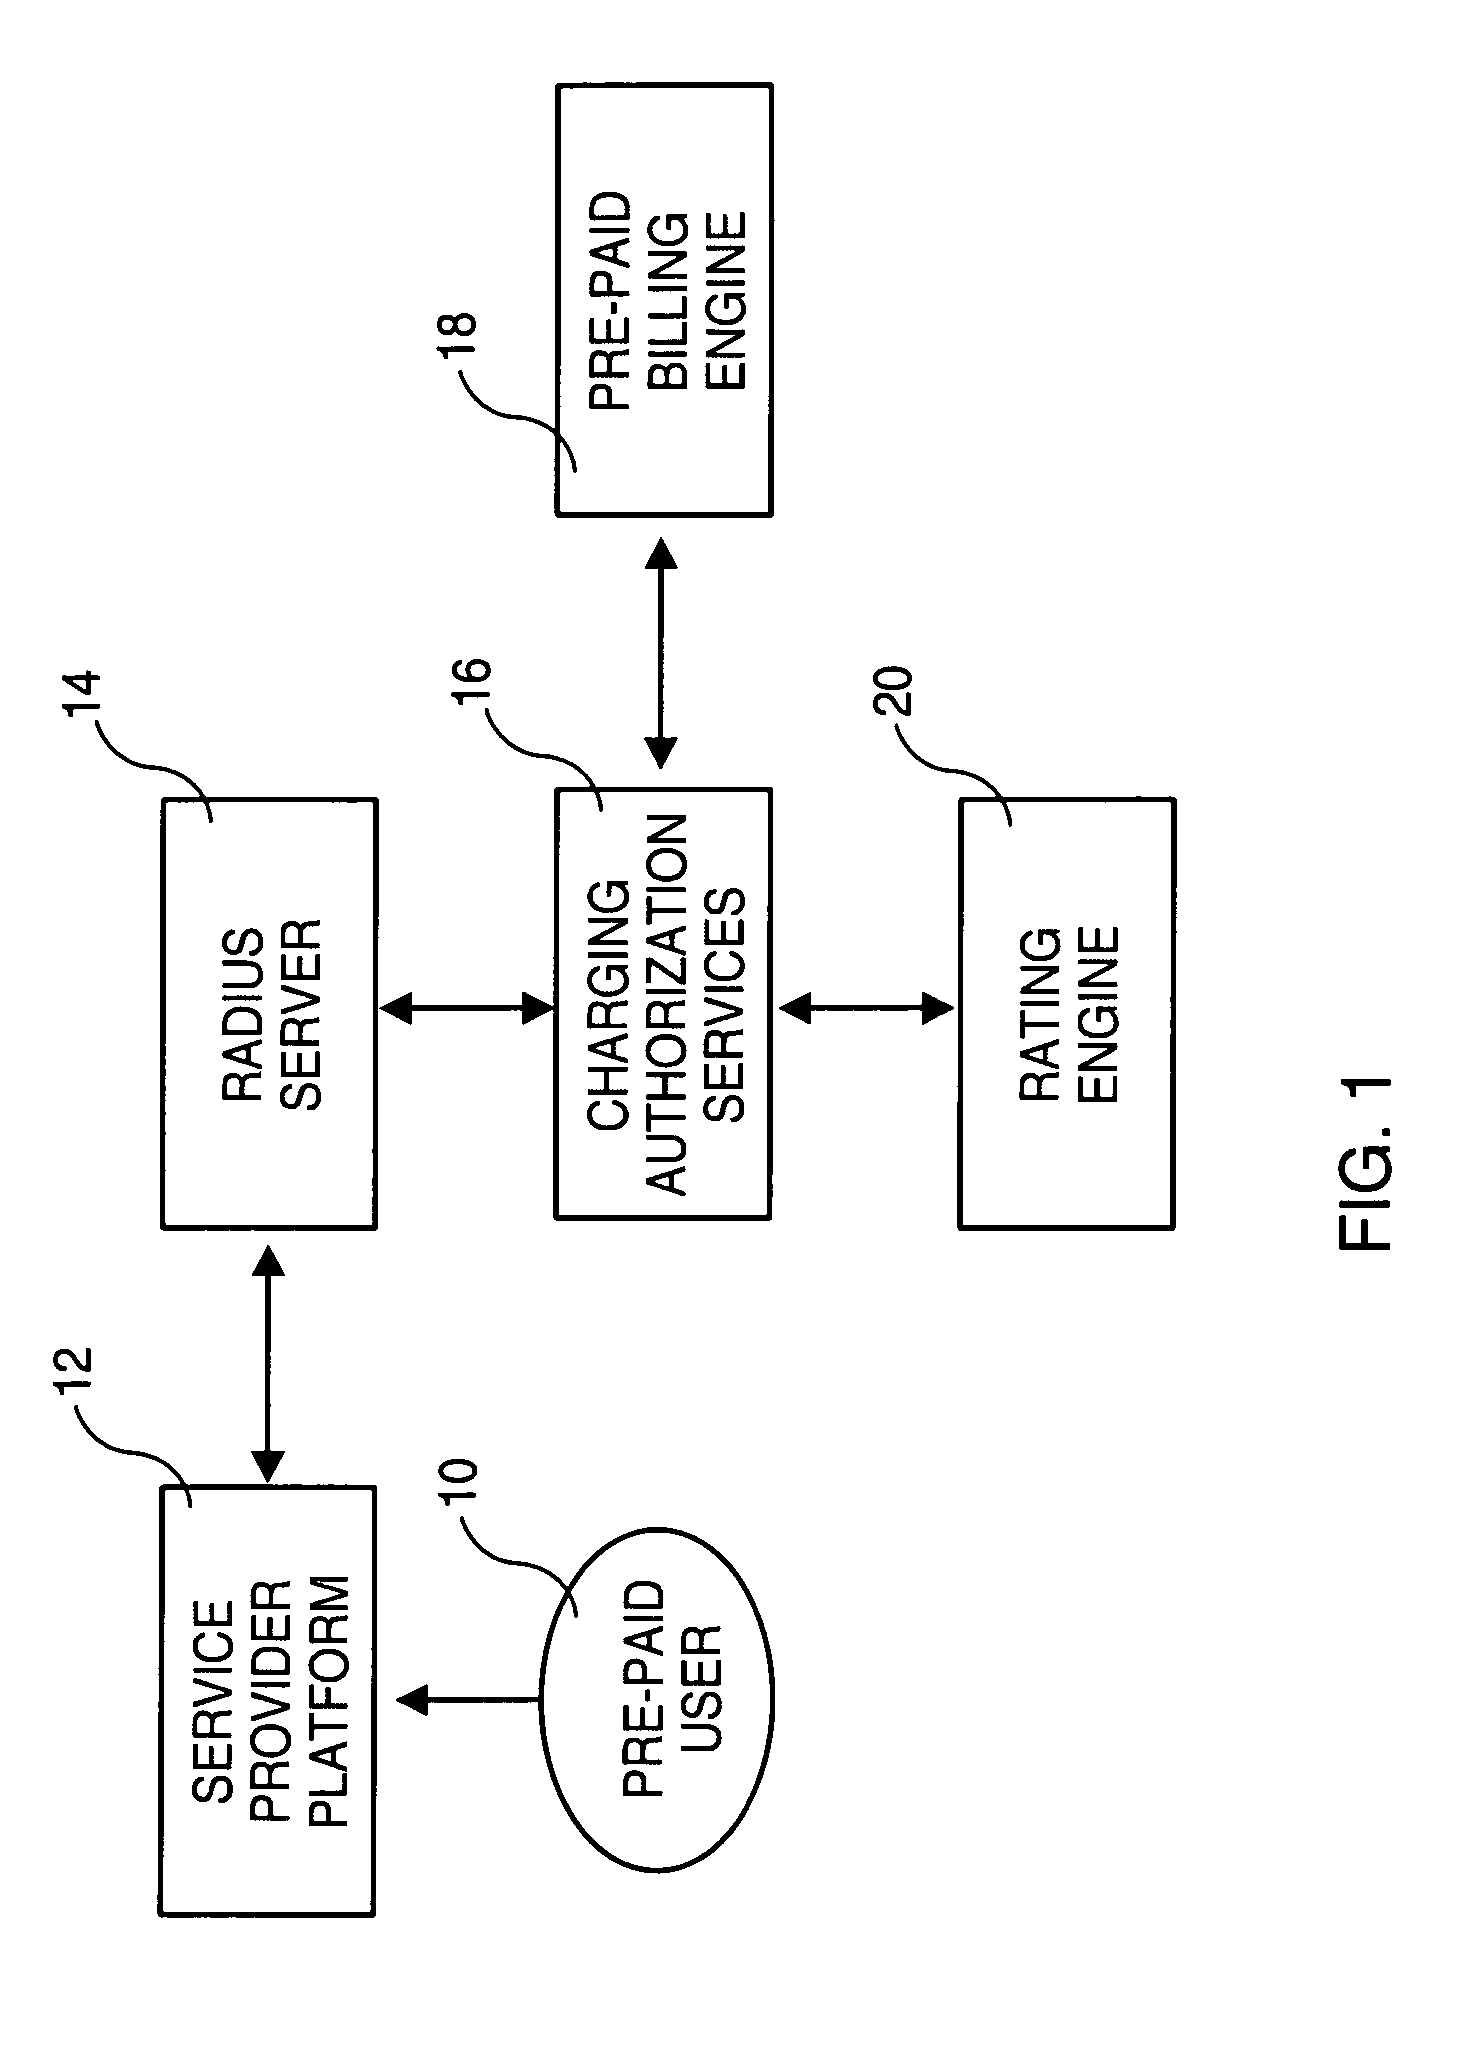 Method for computing a quota of service requested by a pre-paid user to a multi-service provider